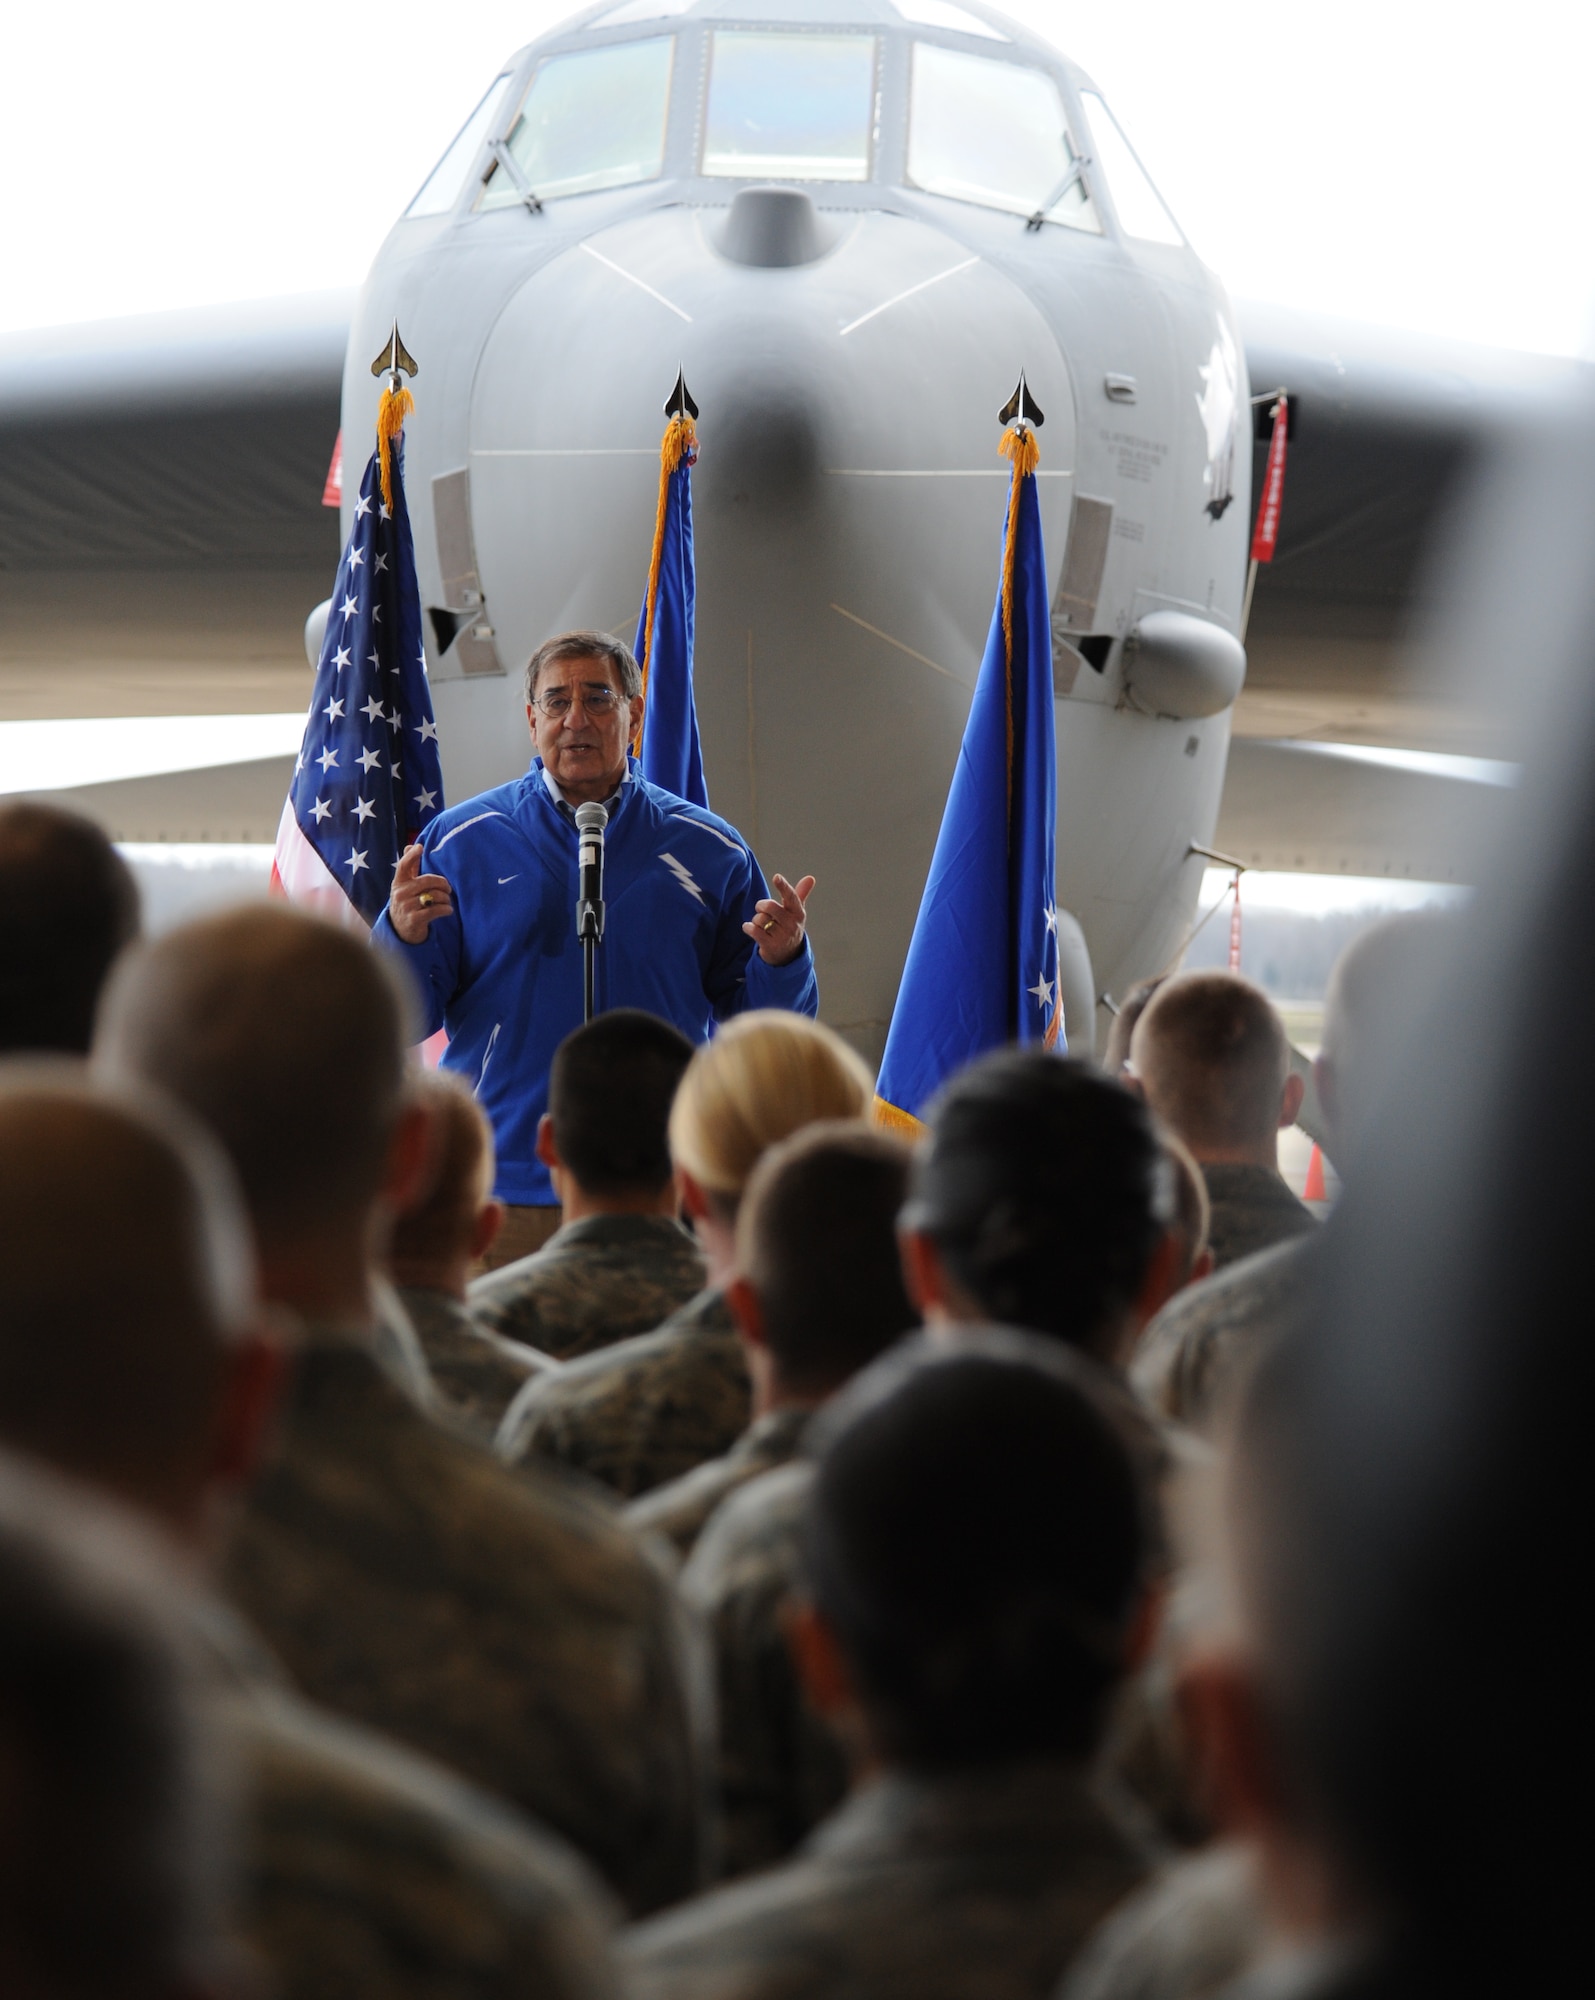 Secretary of Defense Leon E. Panetta addresses Air Force Airmen during a visit to Barksdale Air Force Base, La., Feb. 17. The Secretary hosted an All-Call with more than 300 Airmen to thank them for their efforts in operating, maintaining and supporting the long range strike missions performed by the B-52H Stratofortress, B-2 Spirit and B-1B Lancer bomber aircraft.  During the event, Secretary Panetta also re-enlisted six Airmen and presented medals to Airmen who served in Afghanistan and other overseas locations.  Following the All-Call, Secretary Panetta met with Headquarters Air Force Global Strike Command and 2nd Bomb Wing leadership for briefings on global strike capabilities. (U.S. Air Force photo/Airman 1st Class Micaiah Anthony)(RELEASED)